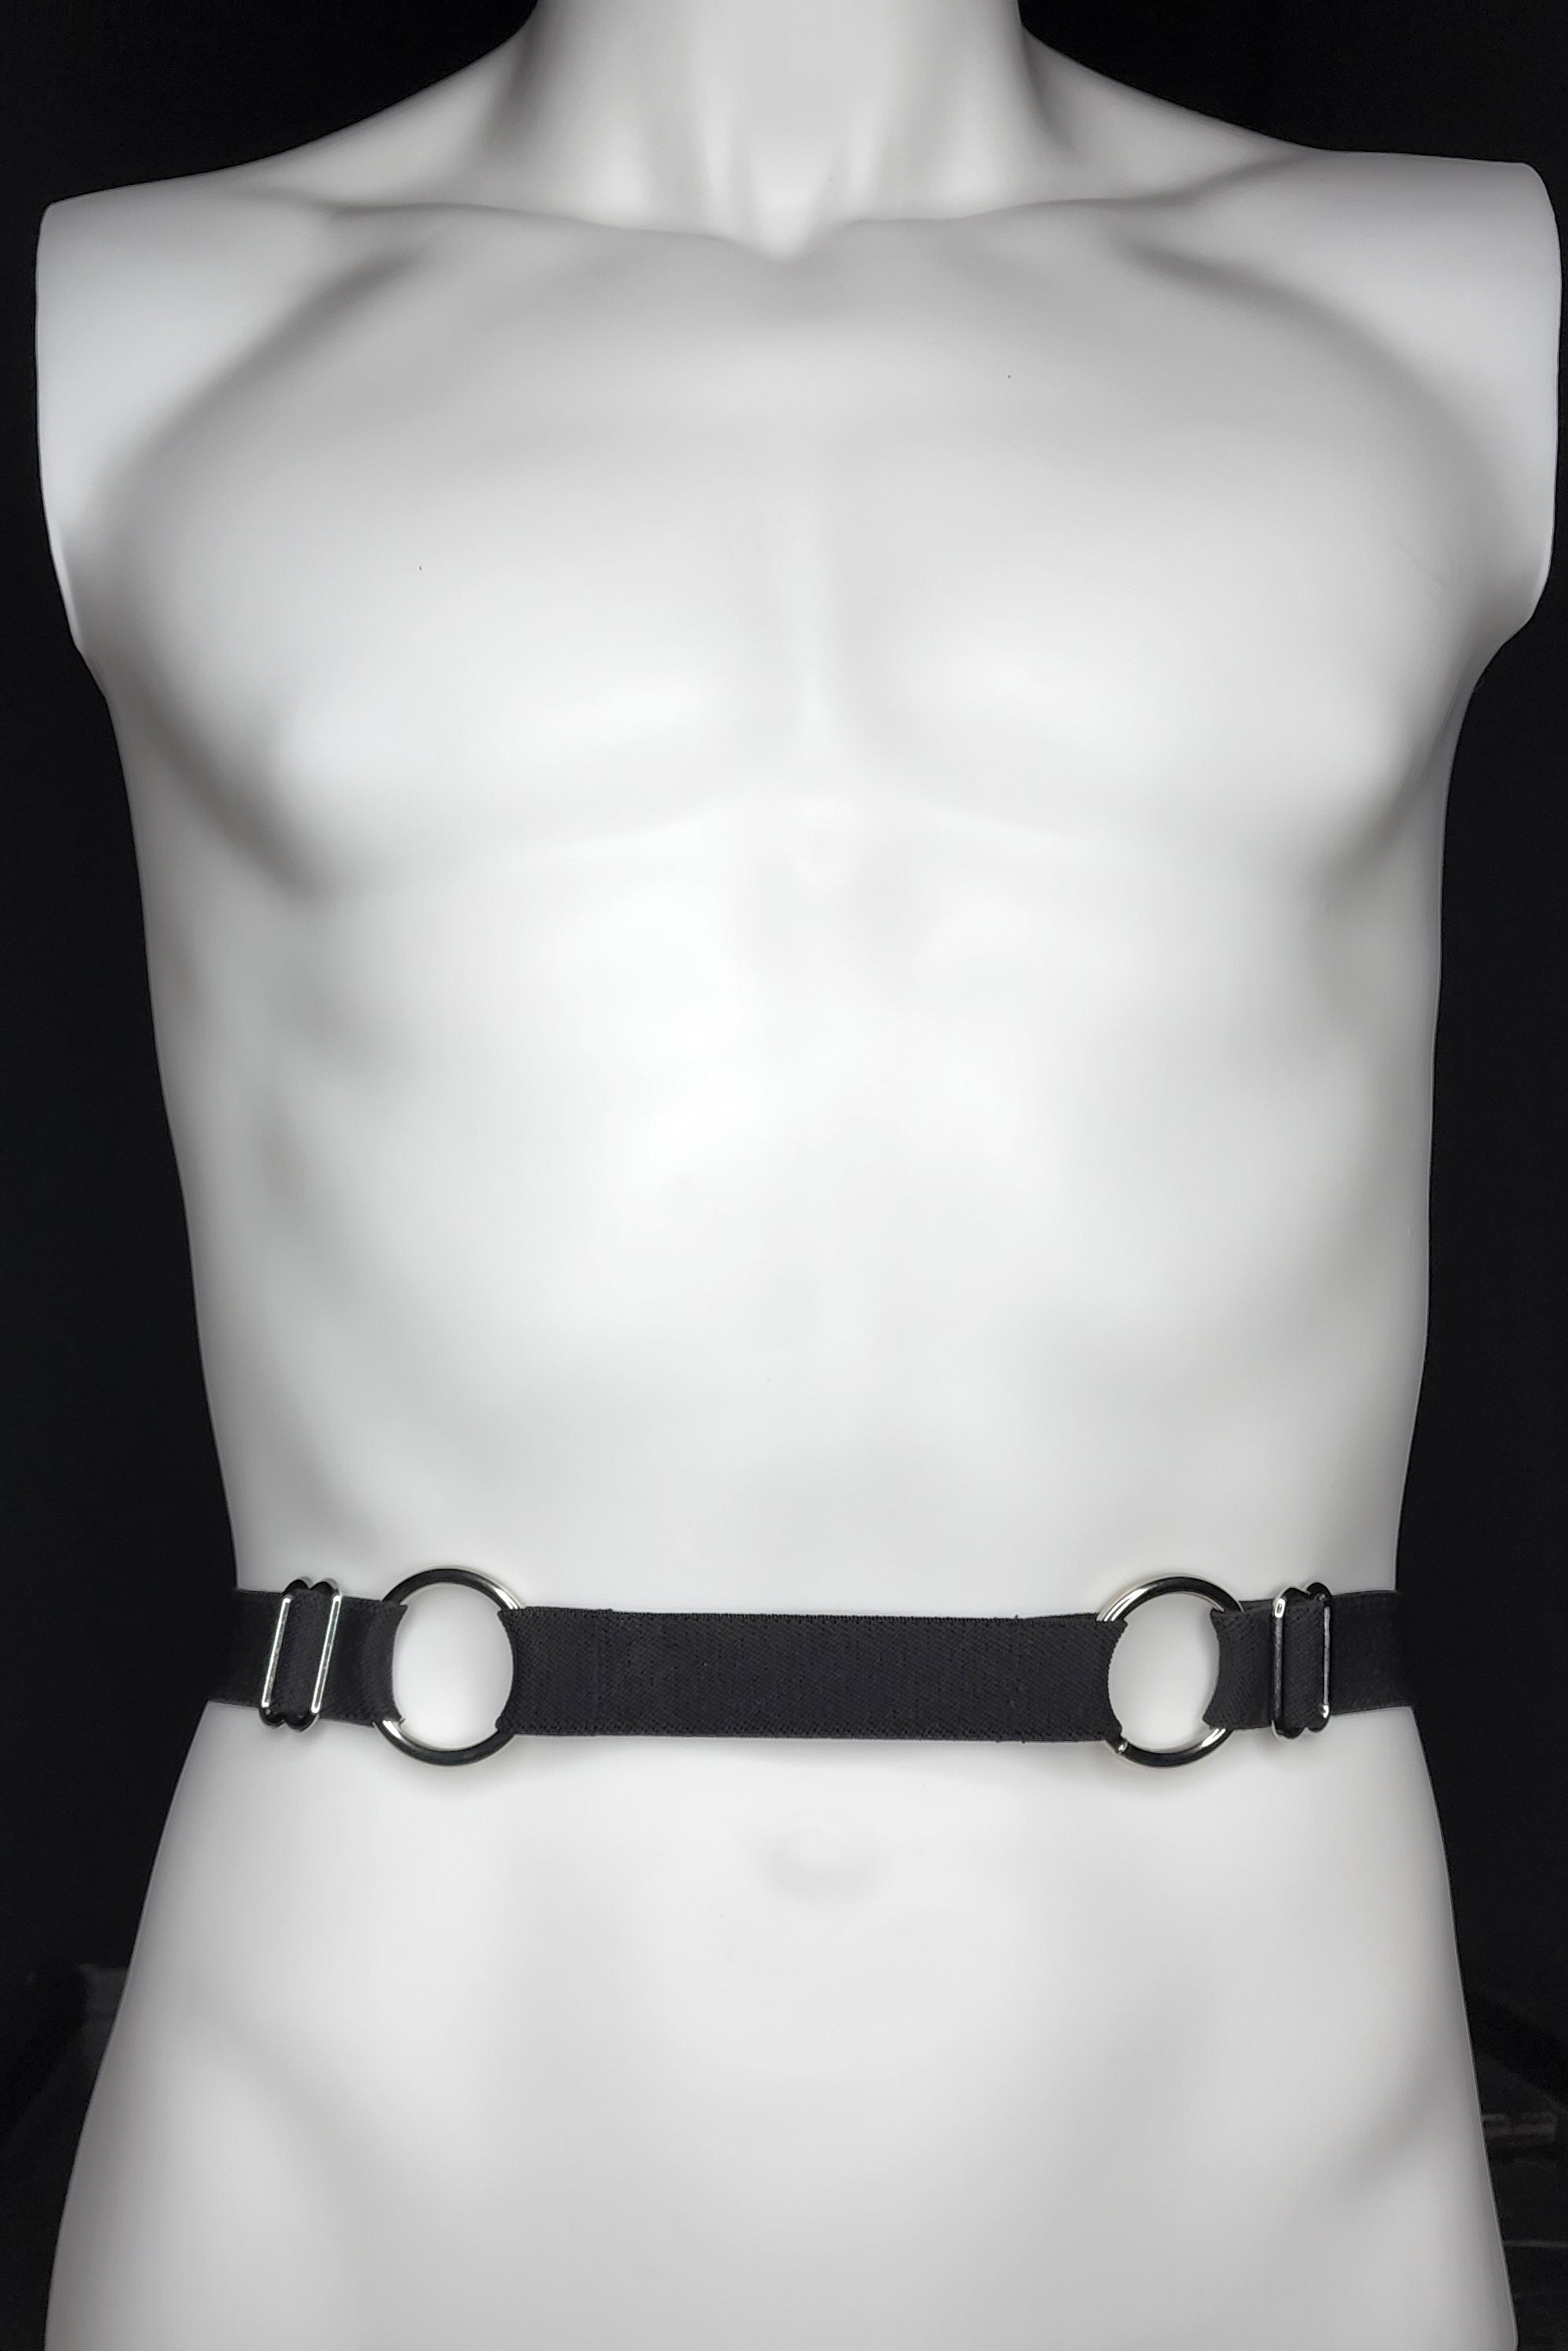 One Strap Two Ring Mid Harness